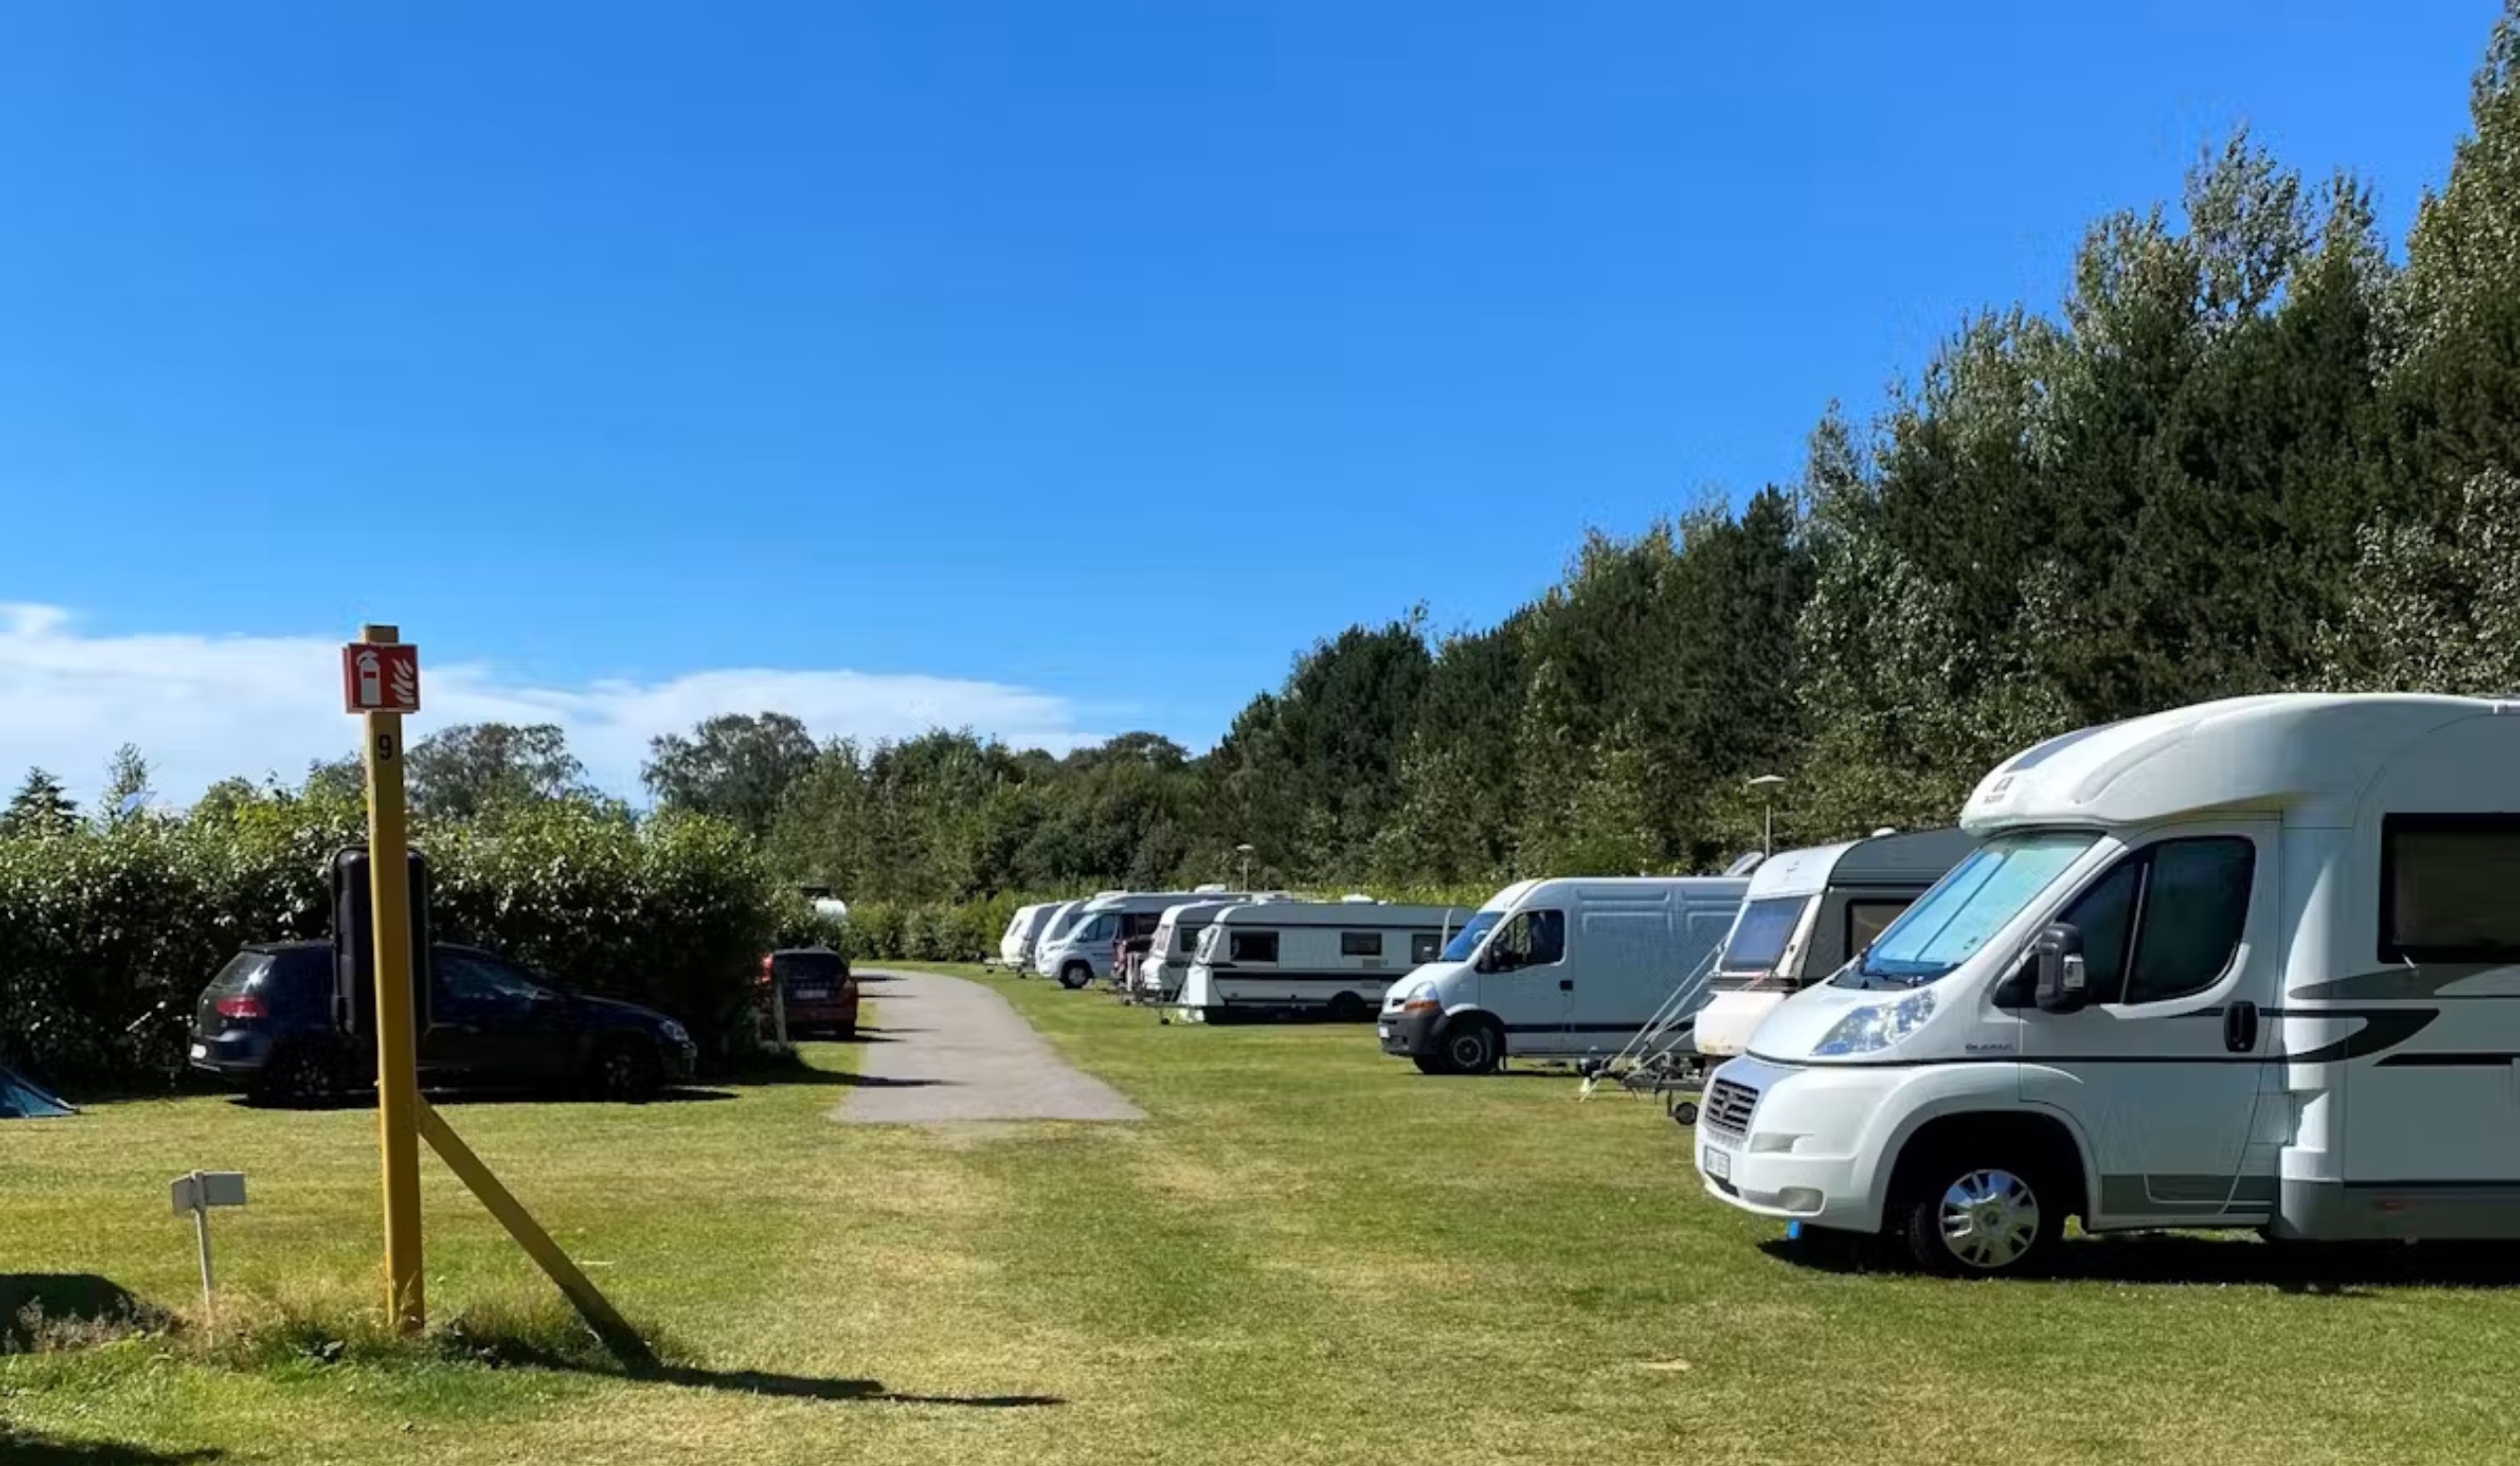 Vilshärads Camping has nice places for motorhomes and caravans.